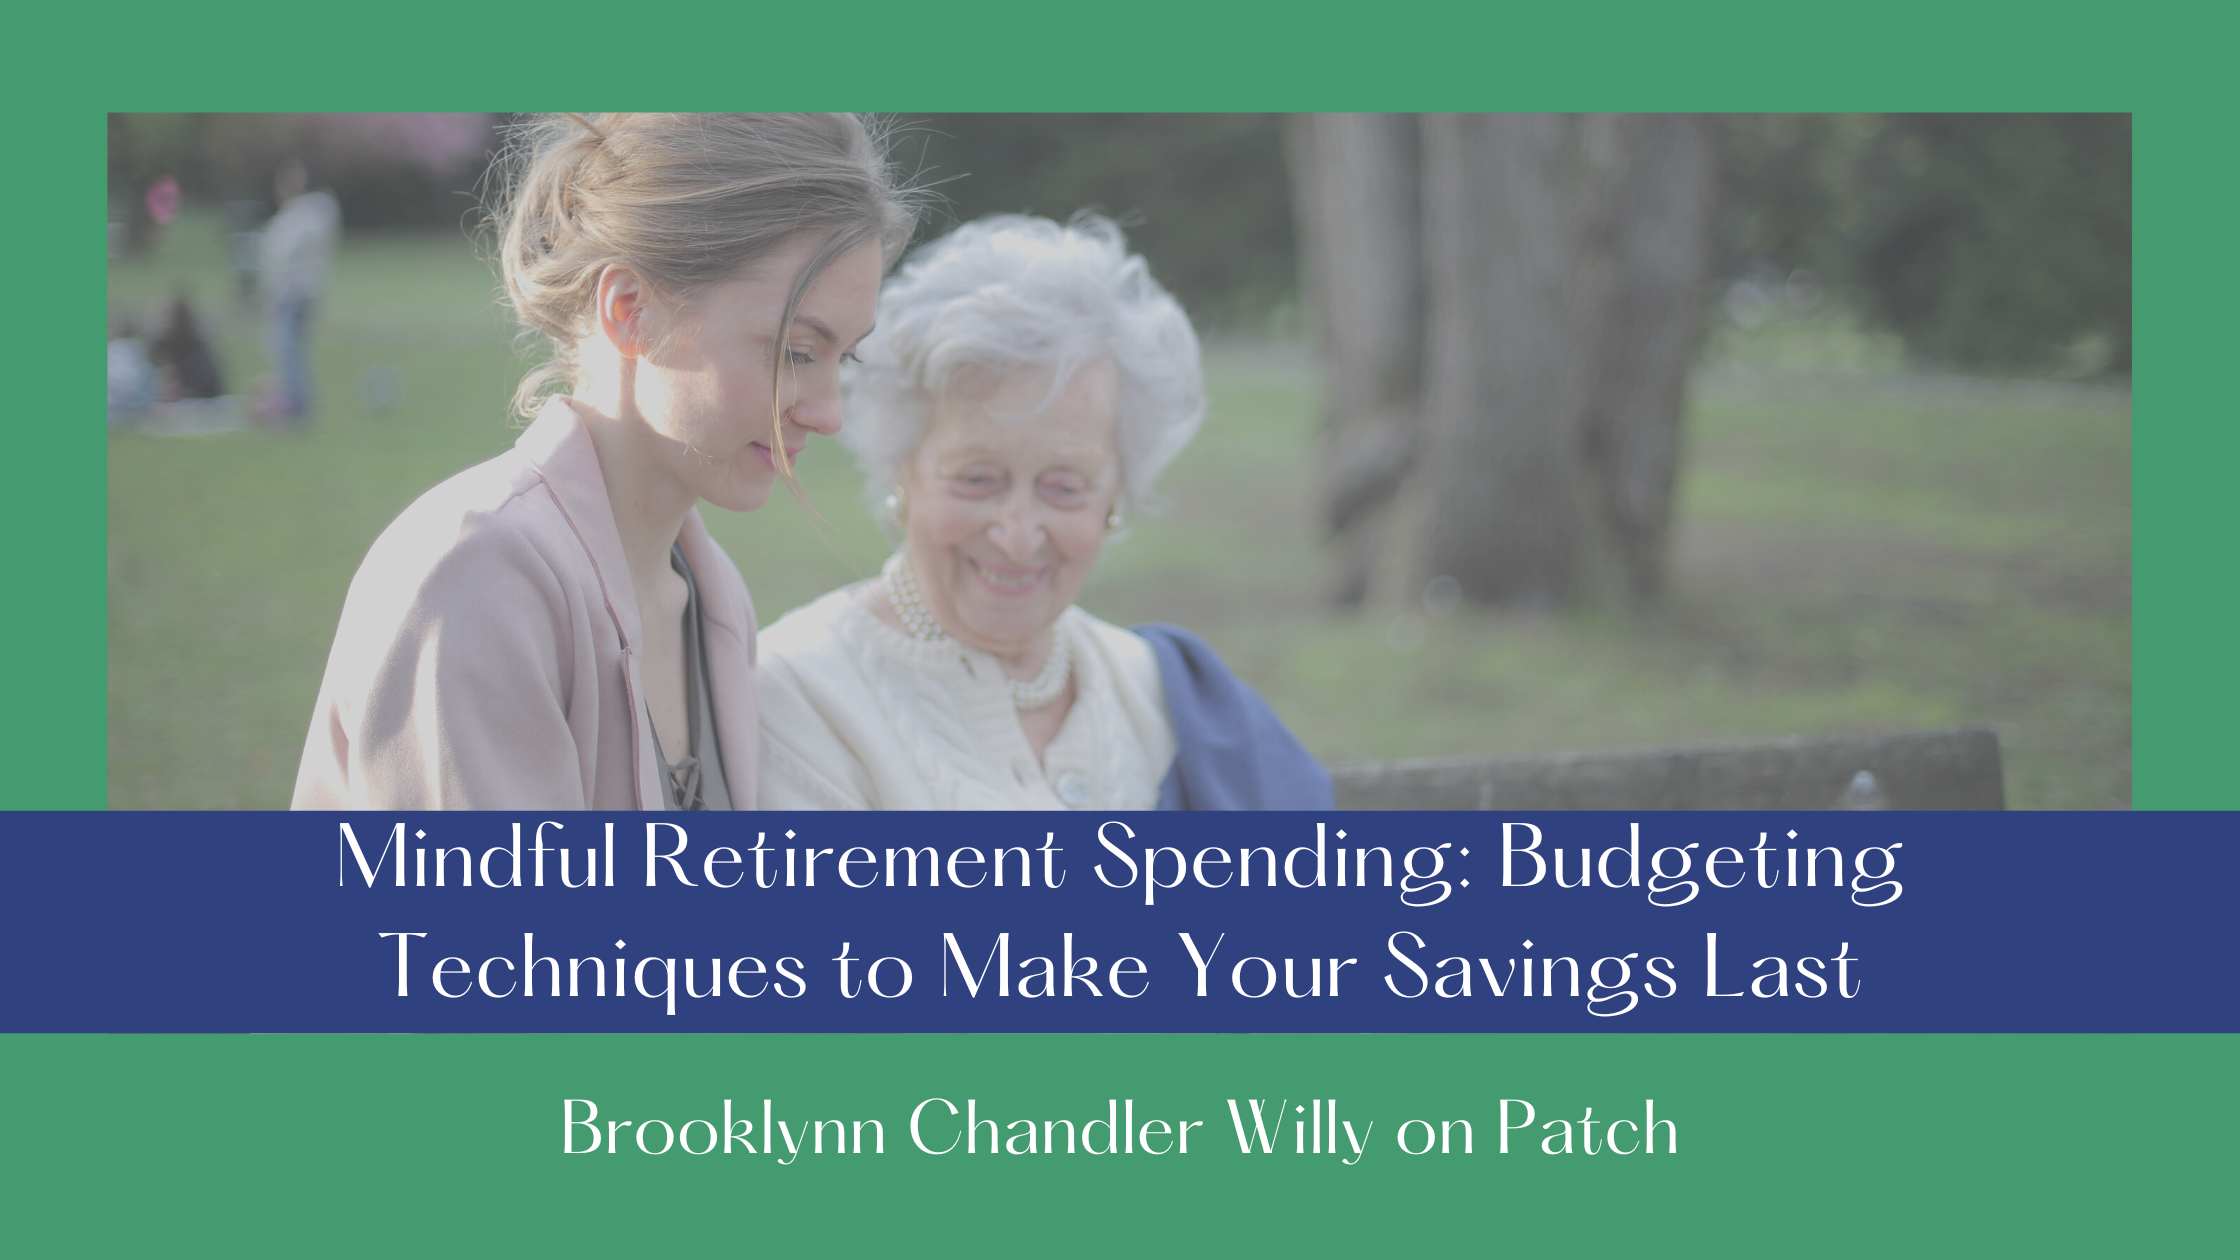 |

| ¥i Lo -
Mindful Retirement Spending: Budgeting

Techniques to Make Your Savings | ast